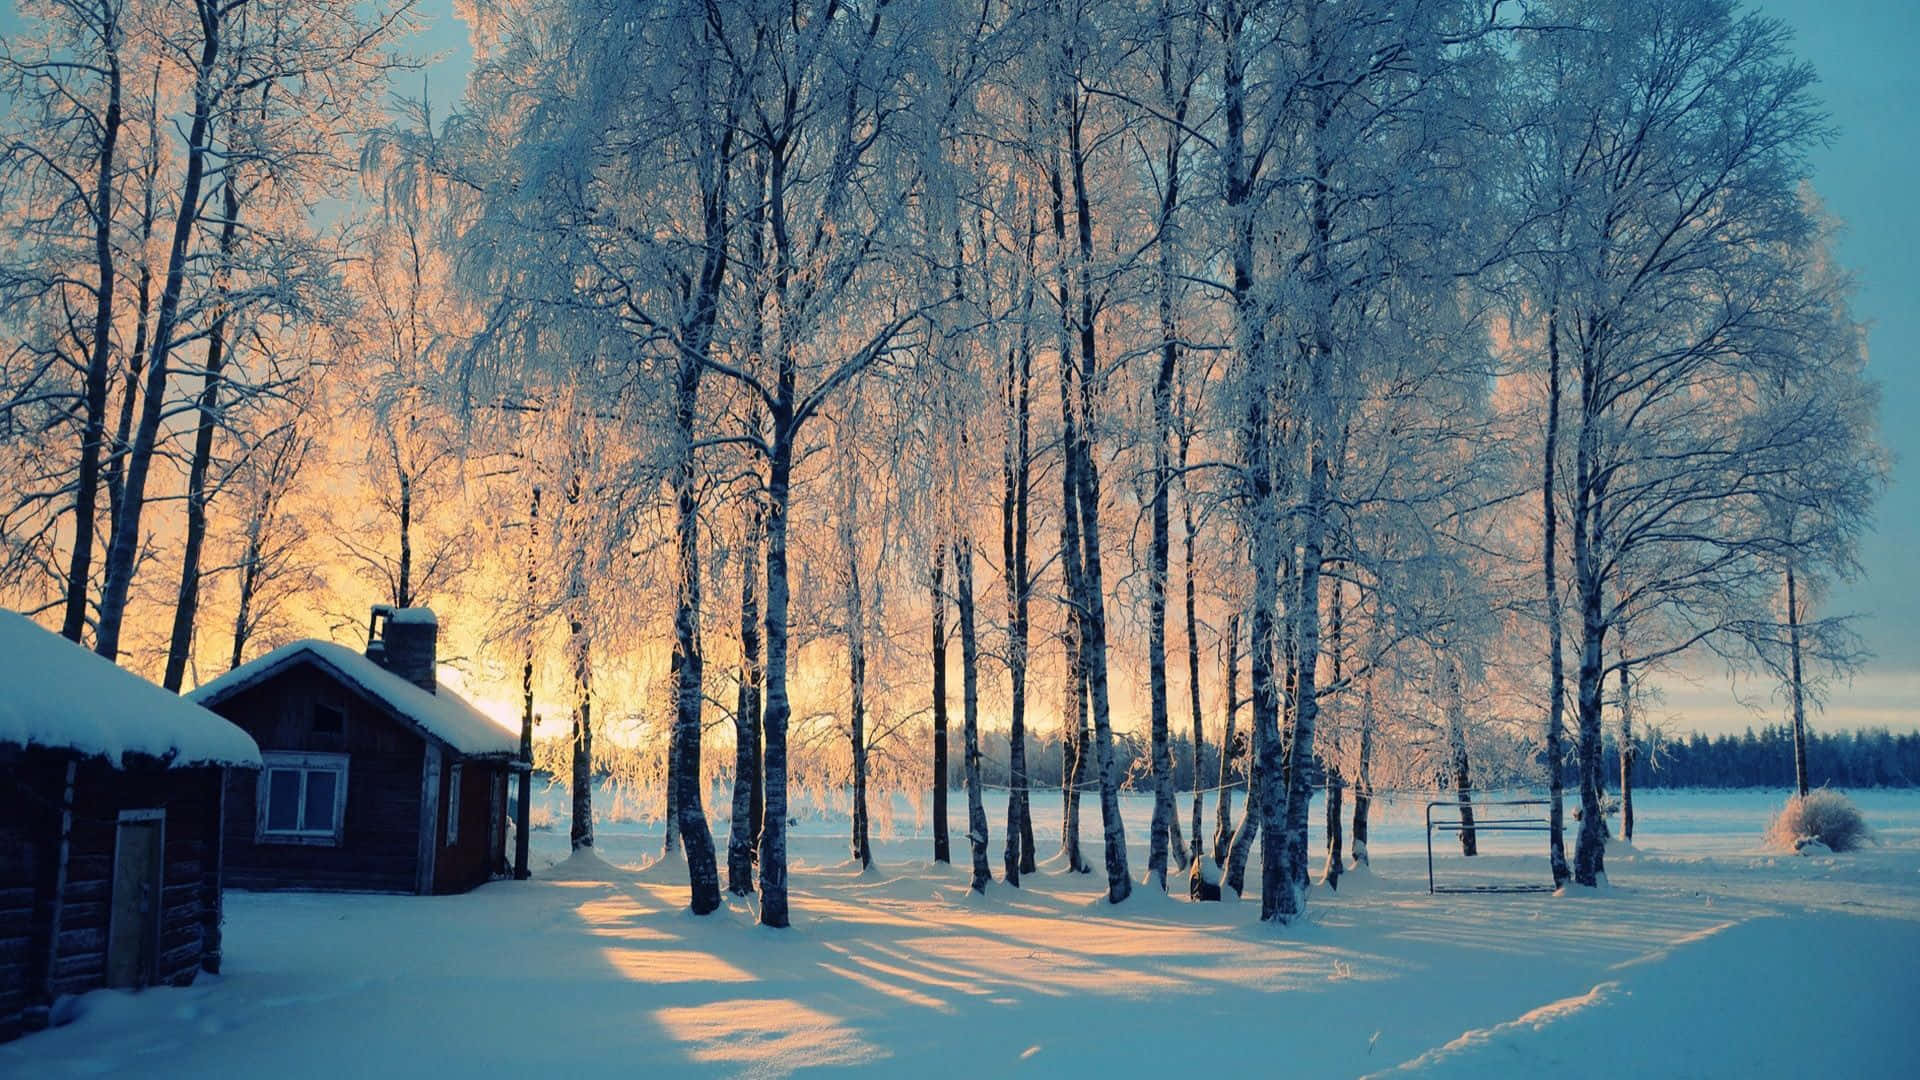 Magical View of a Snowy Winter Morning Wallpaper